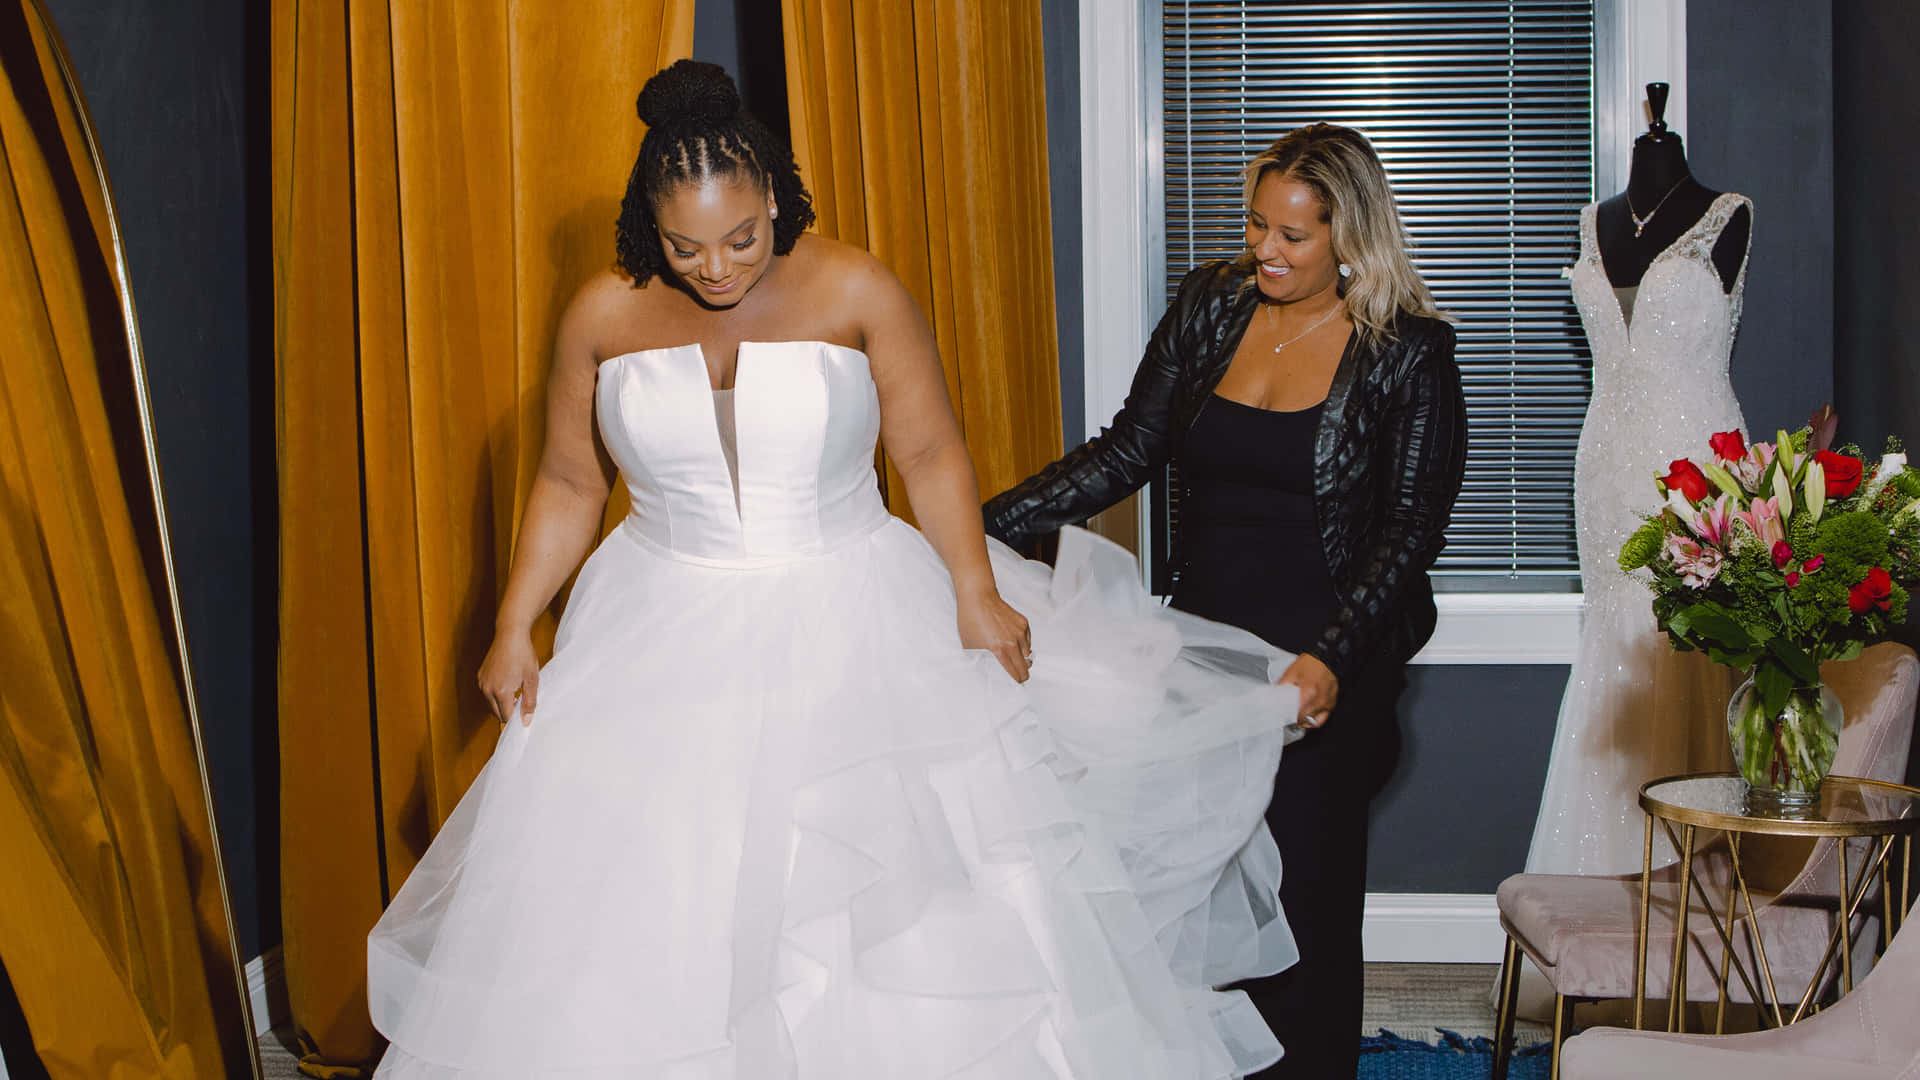 A Woman Is Helping Another Woman Put On A Wedding Dress